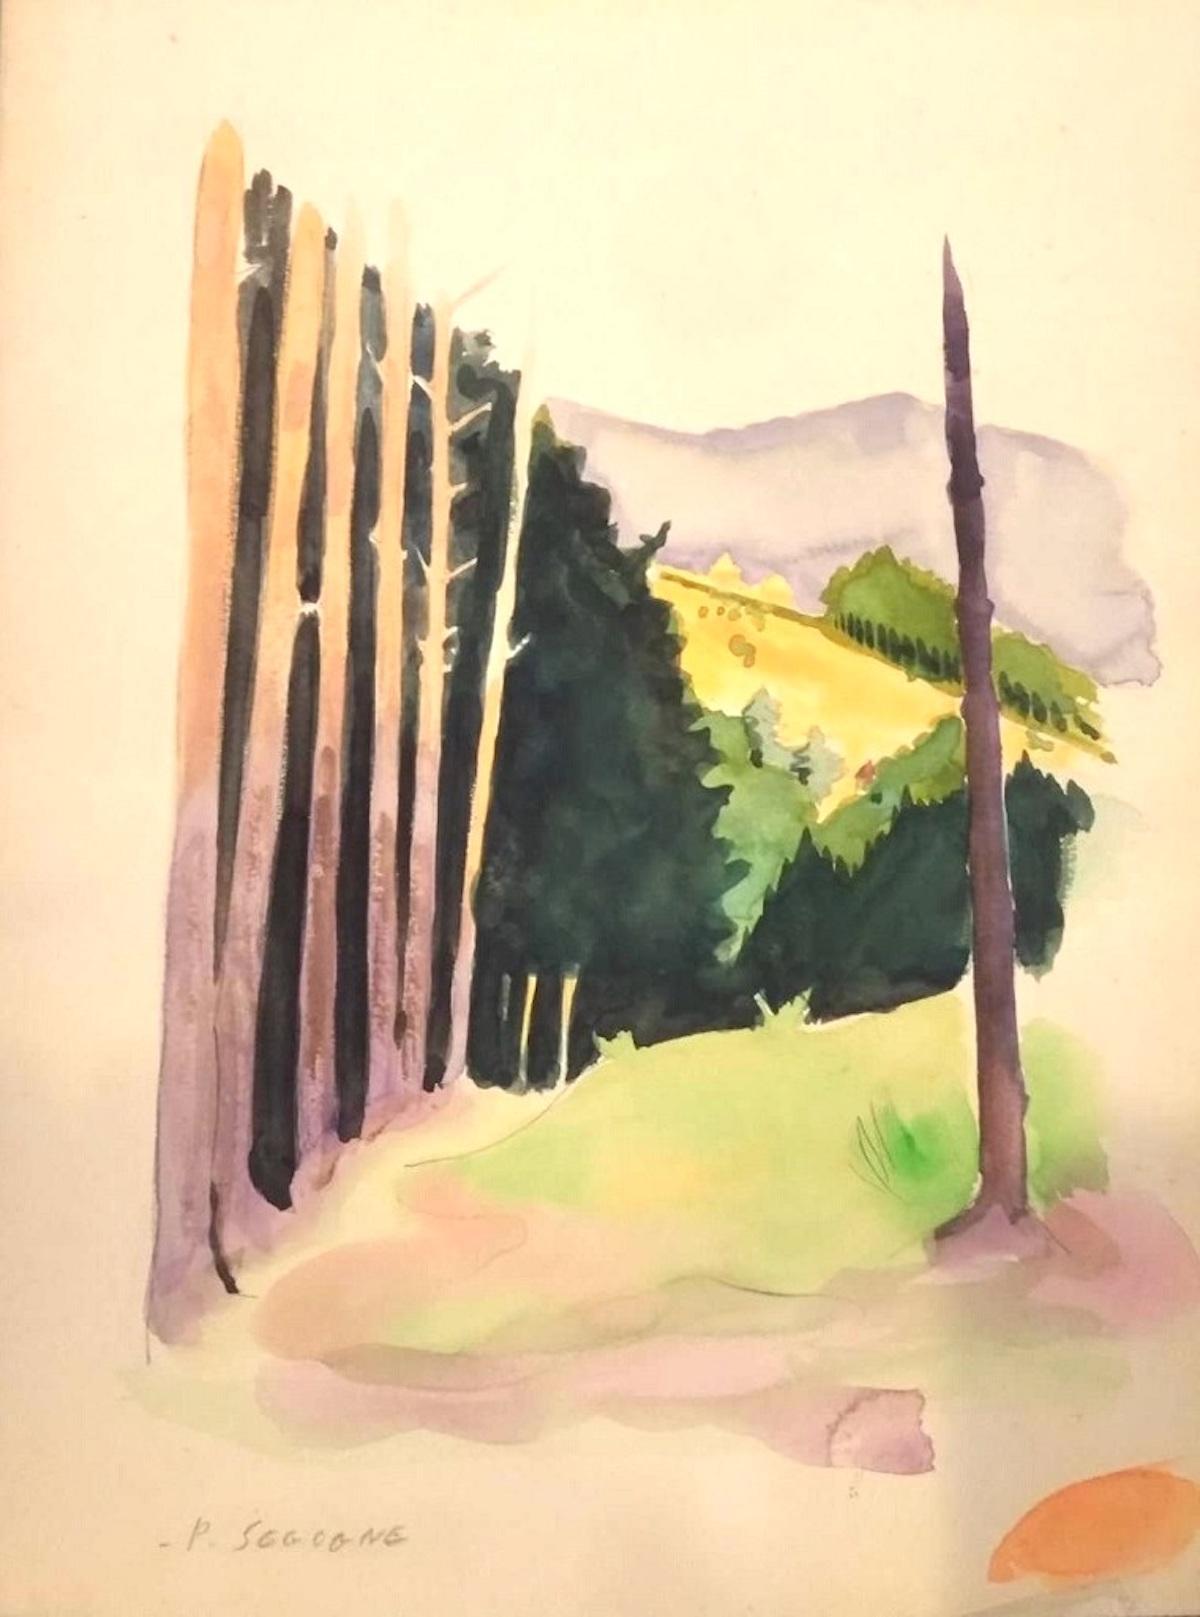 Into the Woods is an original modern artwork realized in the 1930s by the French artist Pierre Segogne (1890-1958).

Original colored watercolor on cardboard. 

Hand-signed by the artist in pencil on the lower left margin: P. Segogne. 

Excellent